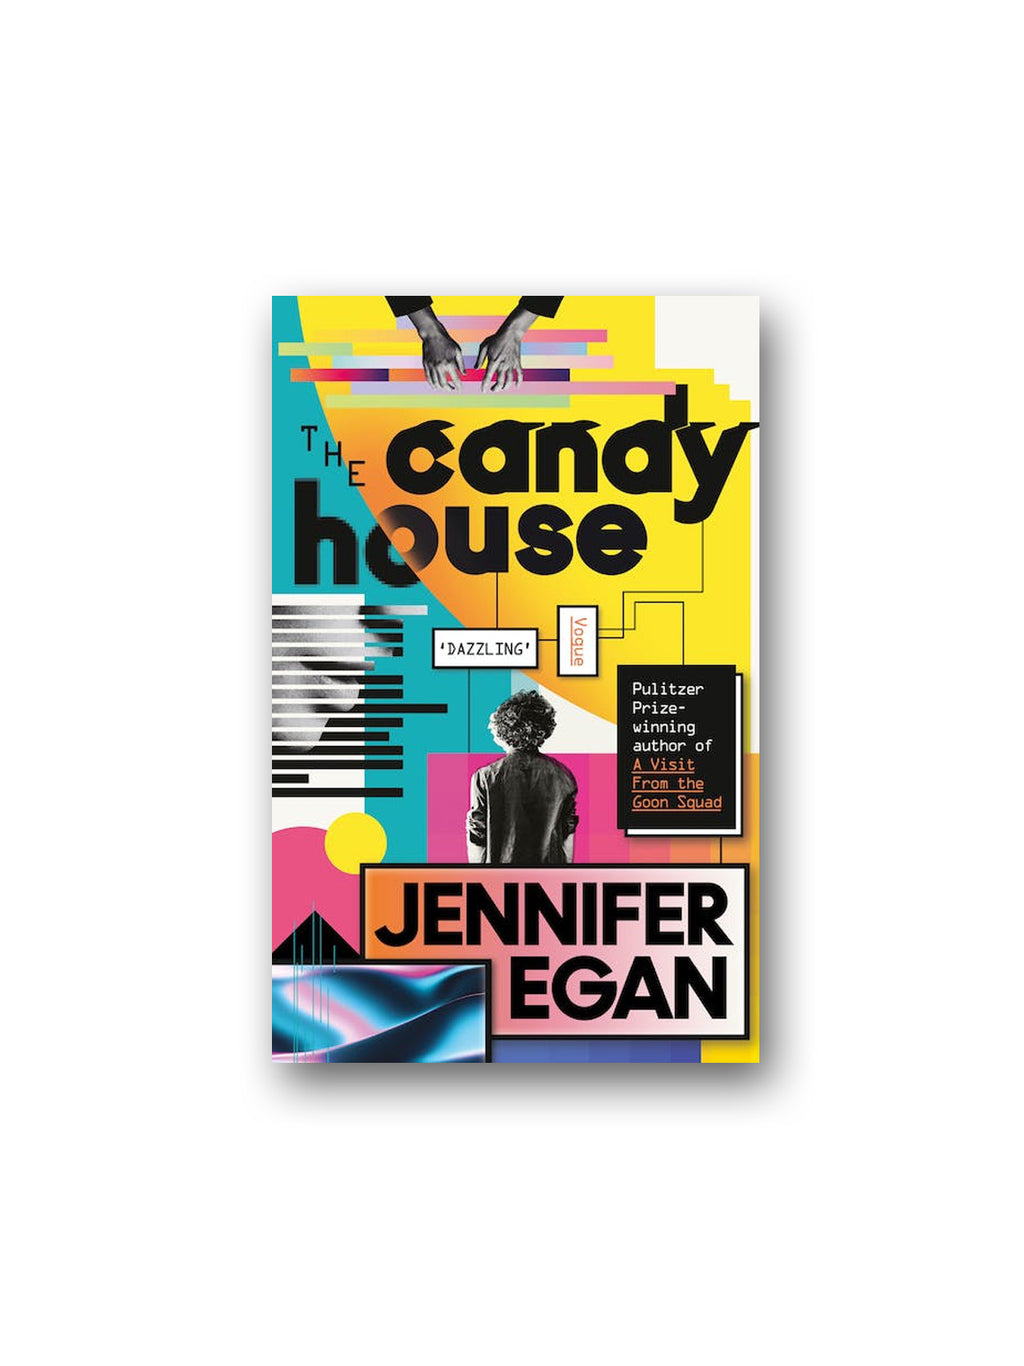 The Candy House